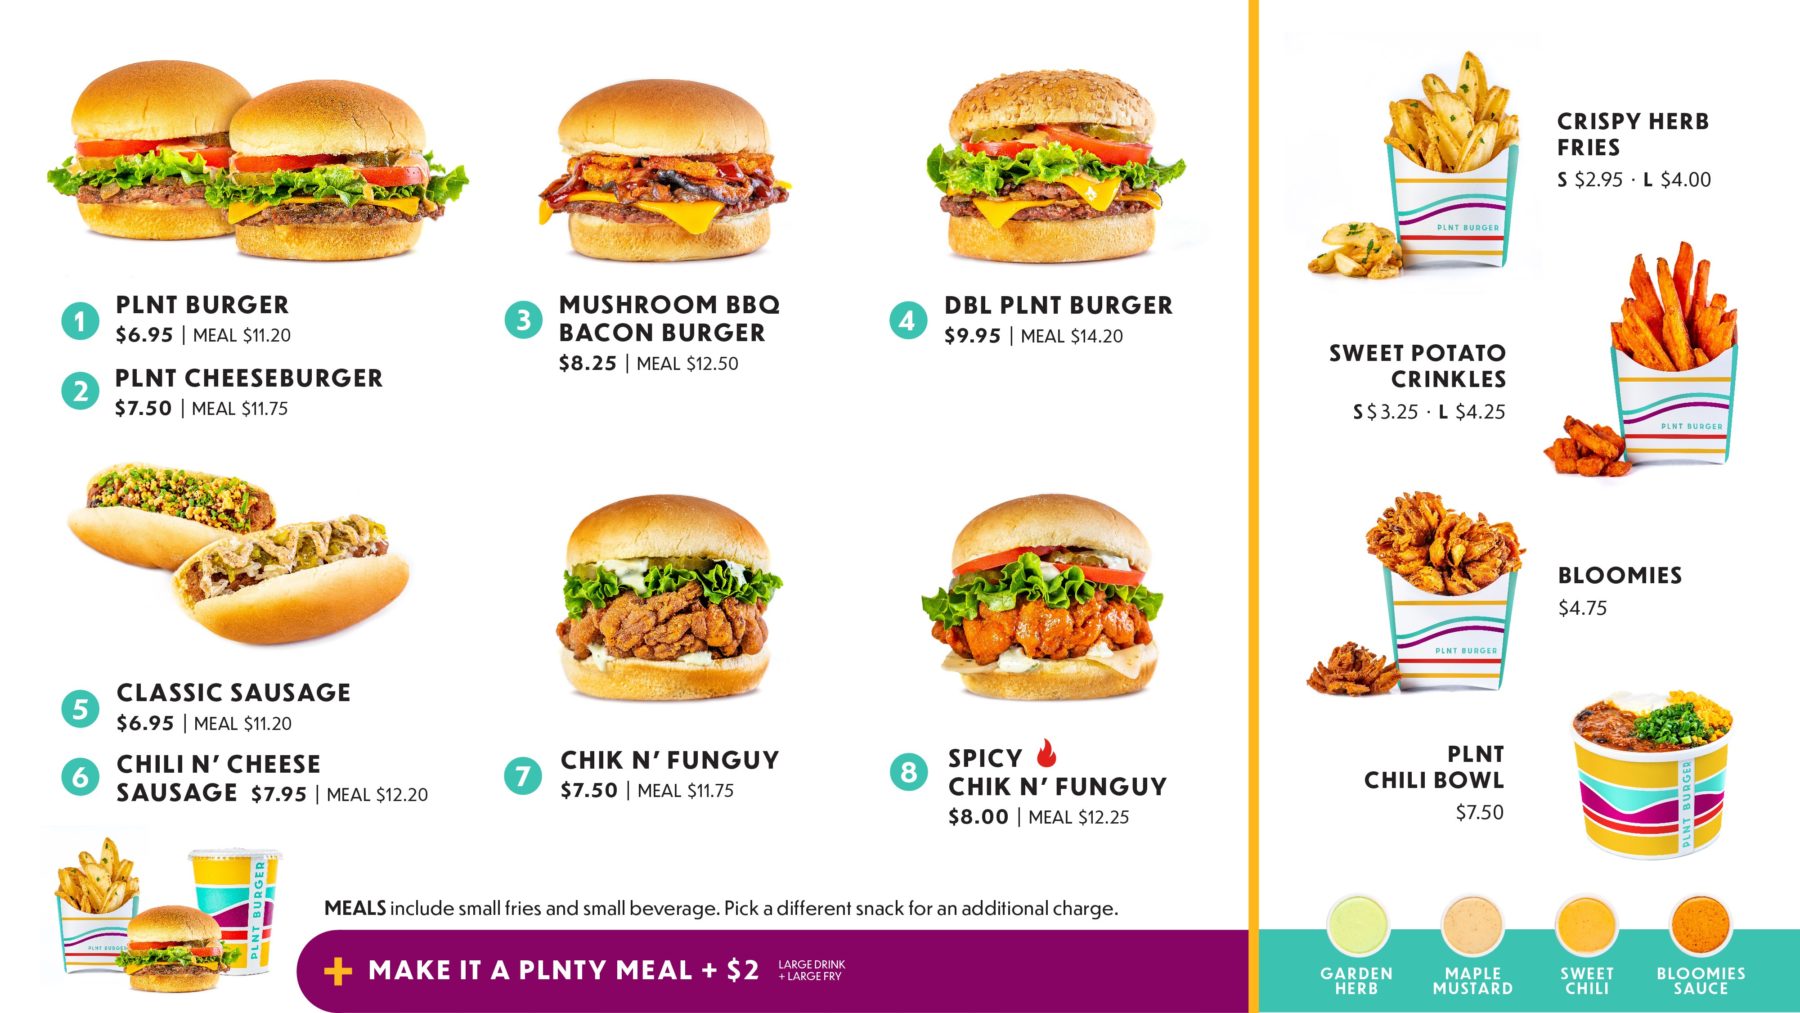 Image of PLNT Burger's menu, including burgers, sausages, chick'n sandwiches, and sides